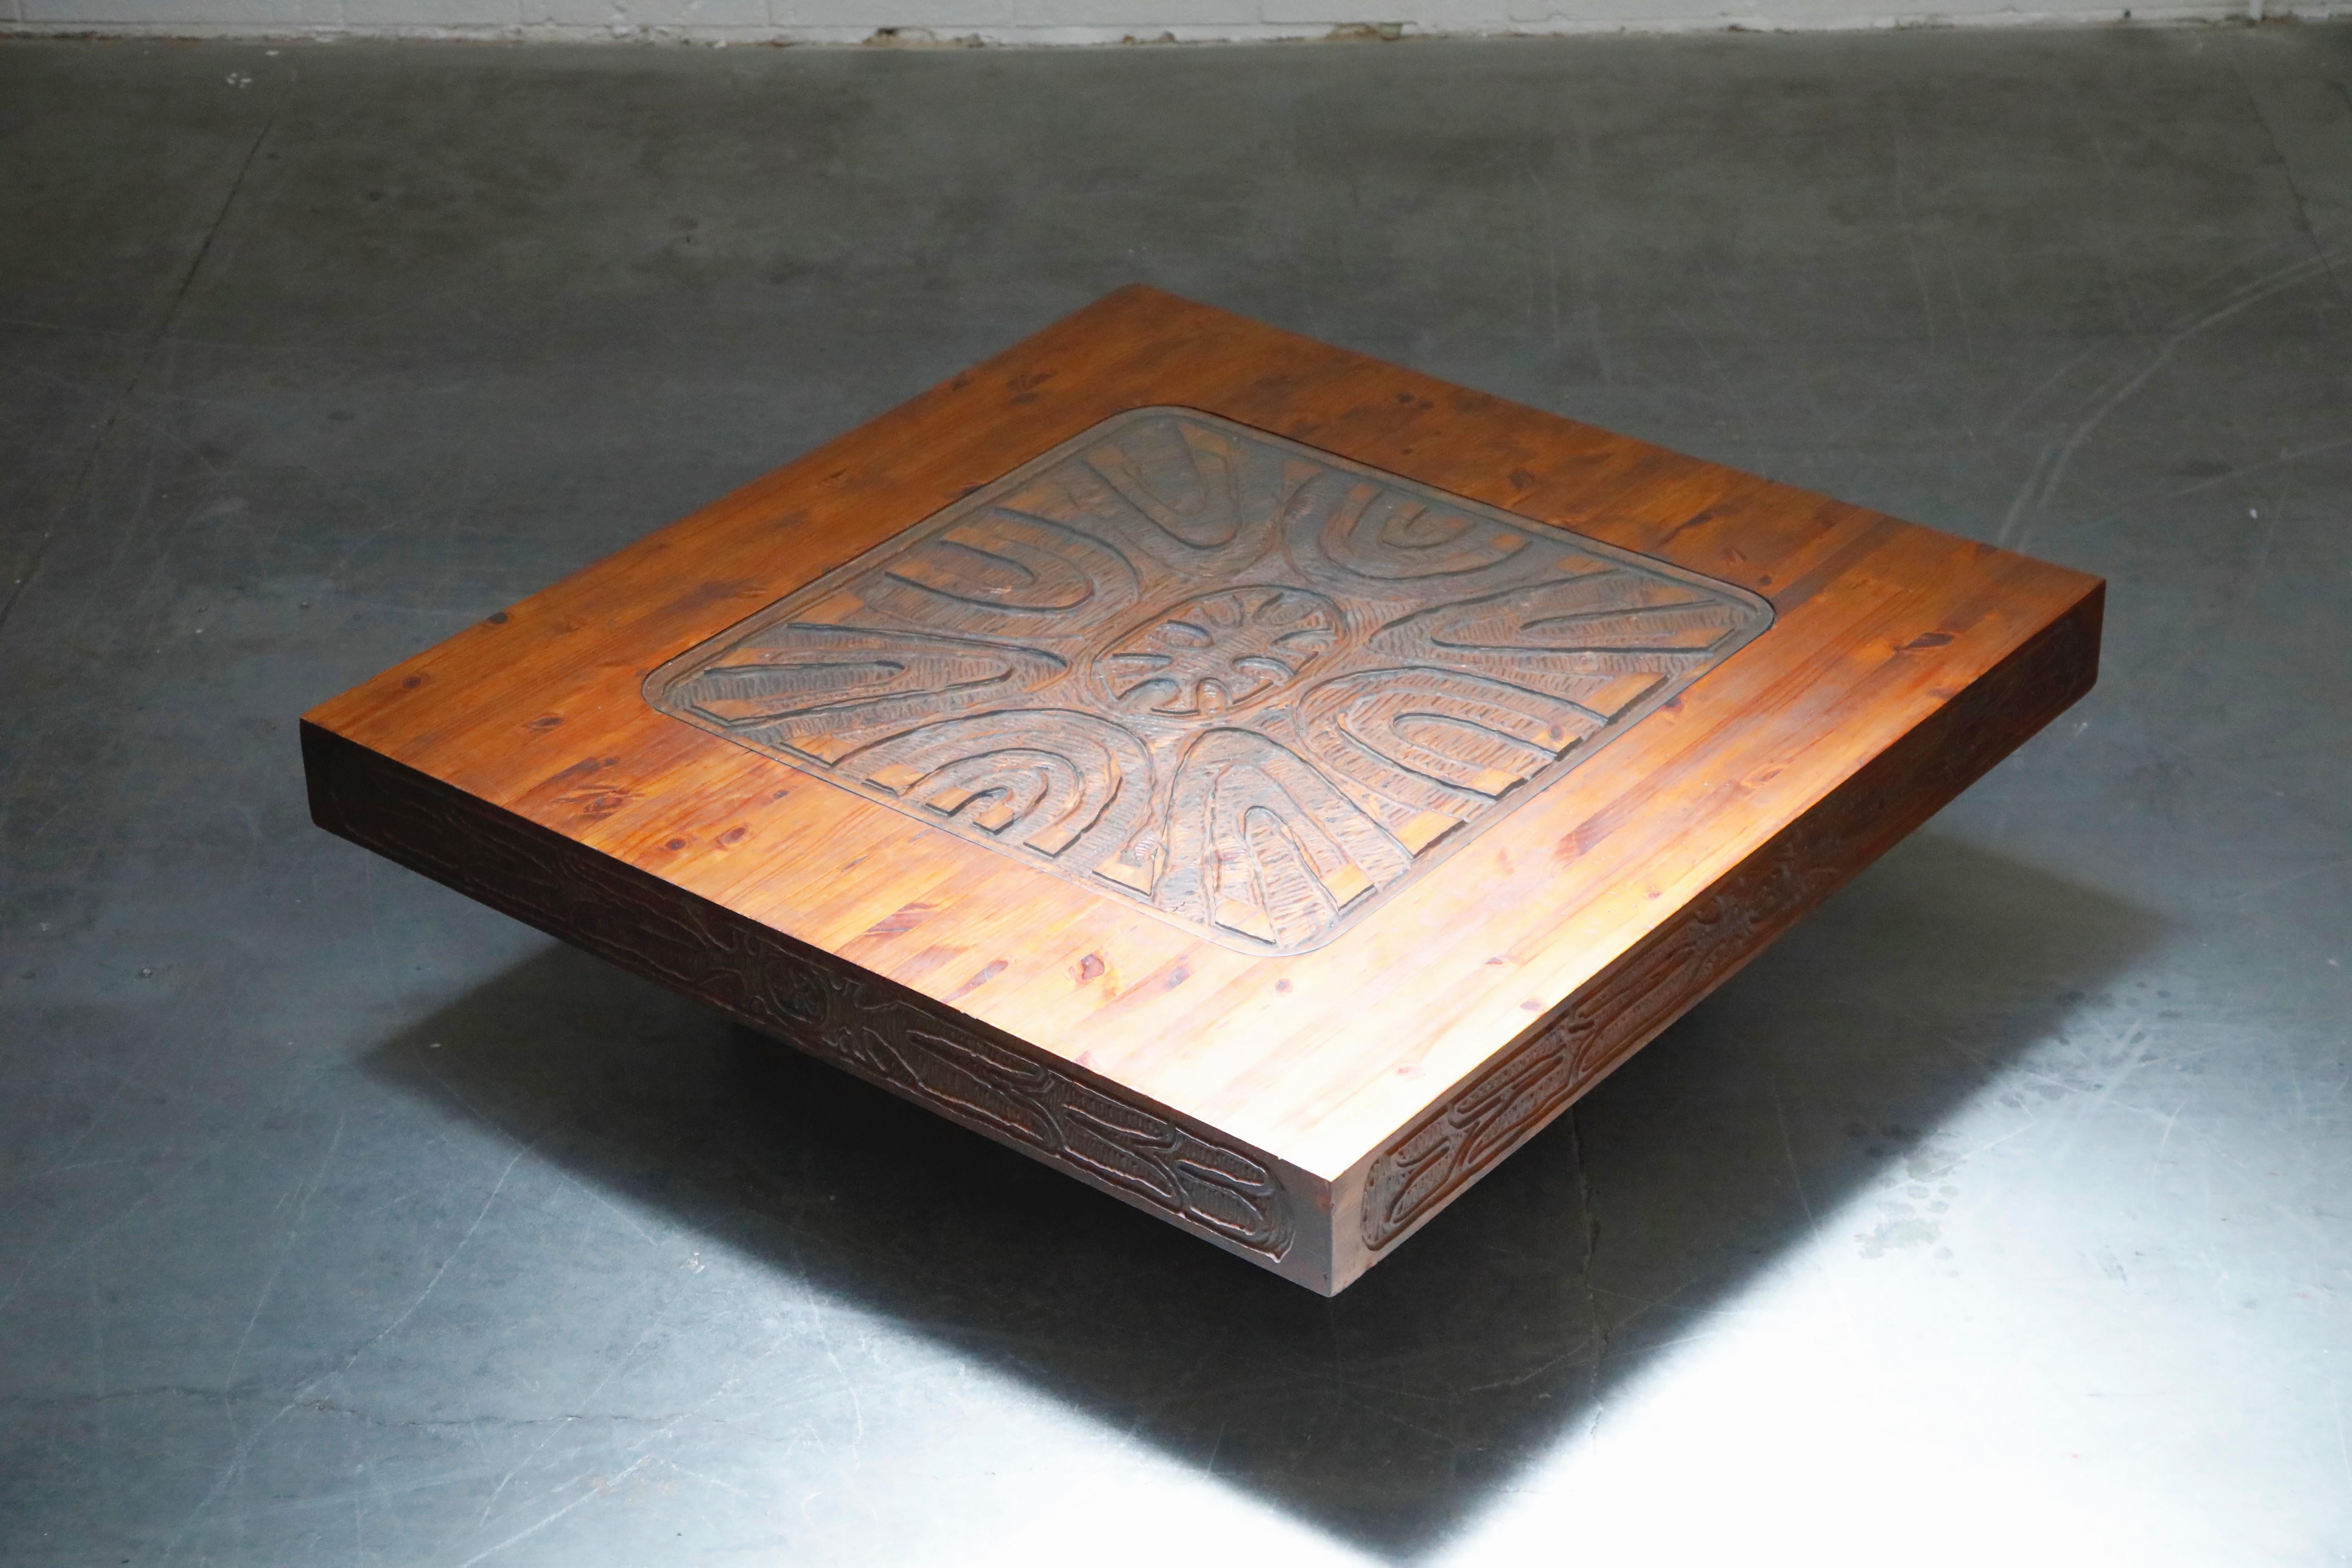 This incredible Mexican modern carved wood coffee table is from circa 1970s, featuring a hefty 53+